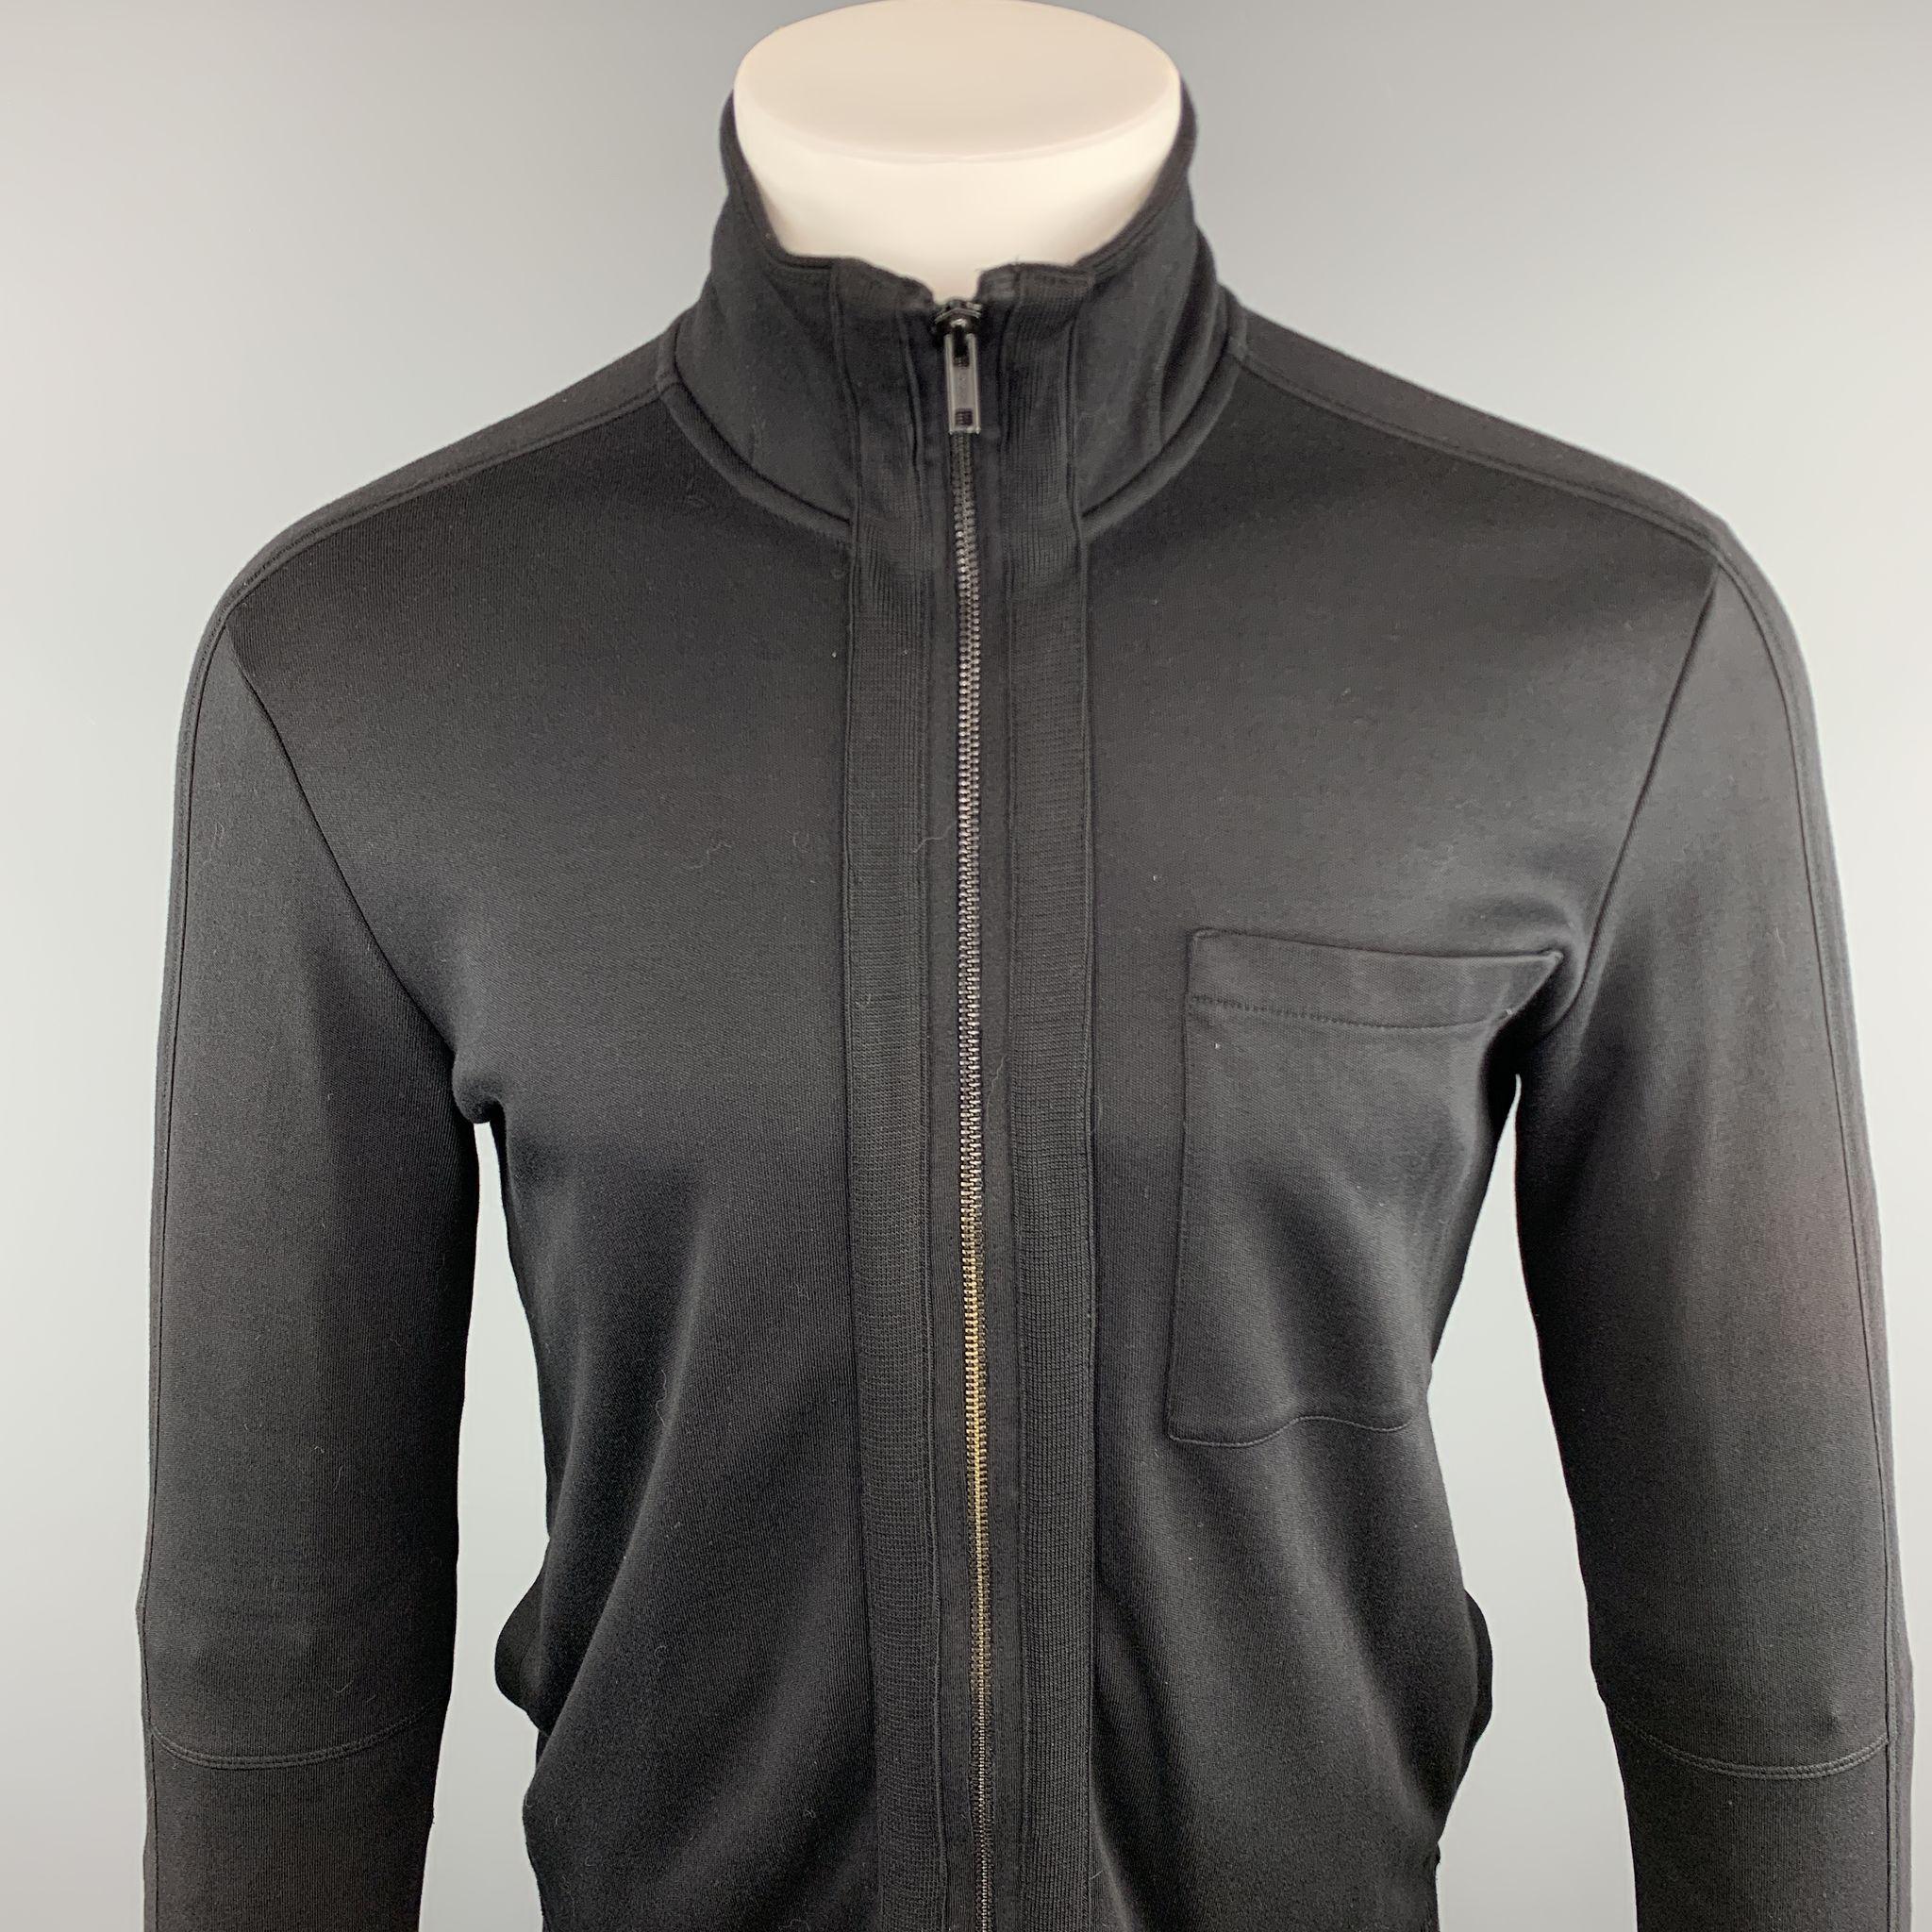 HUGO BOSS Jacket comes in a black cotton featuring a front patch pocket and a full zip closure. 

Excellent Pre-Owned Condition.
Marked: S

Measurements:

Shoulder: 17.5 in. 
Chest: 38 in. 
Sleeve: 26 in. 
Length: 26 in. 